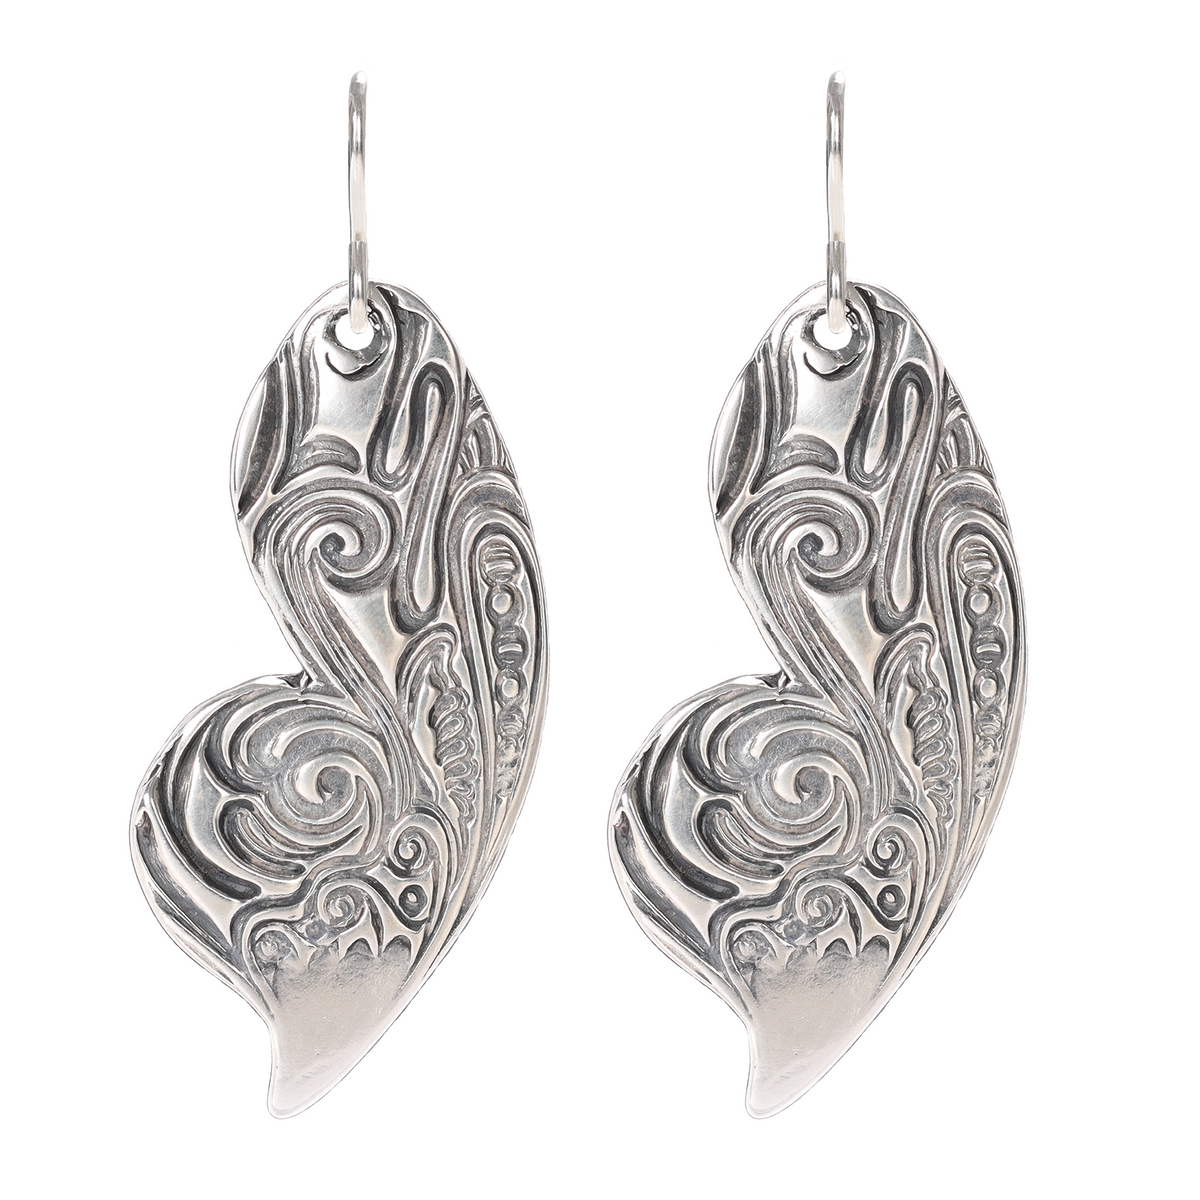 Butterfly Wing Textured Large Sterling Silver Earrings on Short Ear Wires